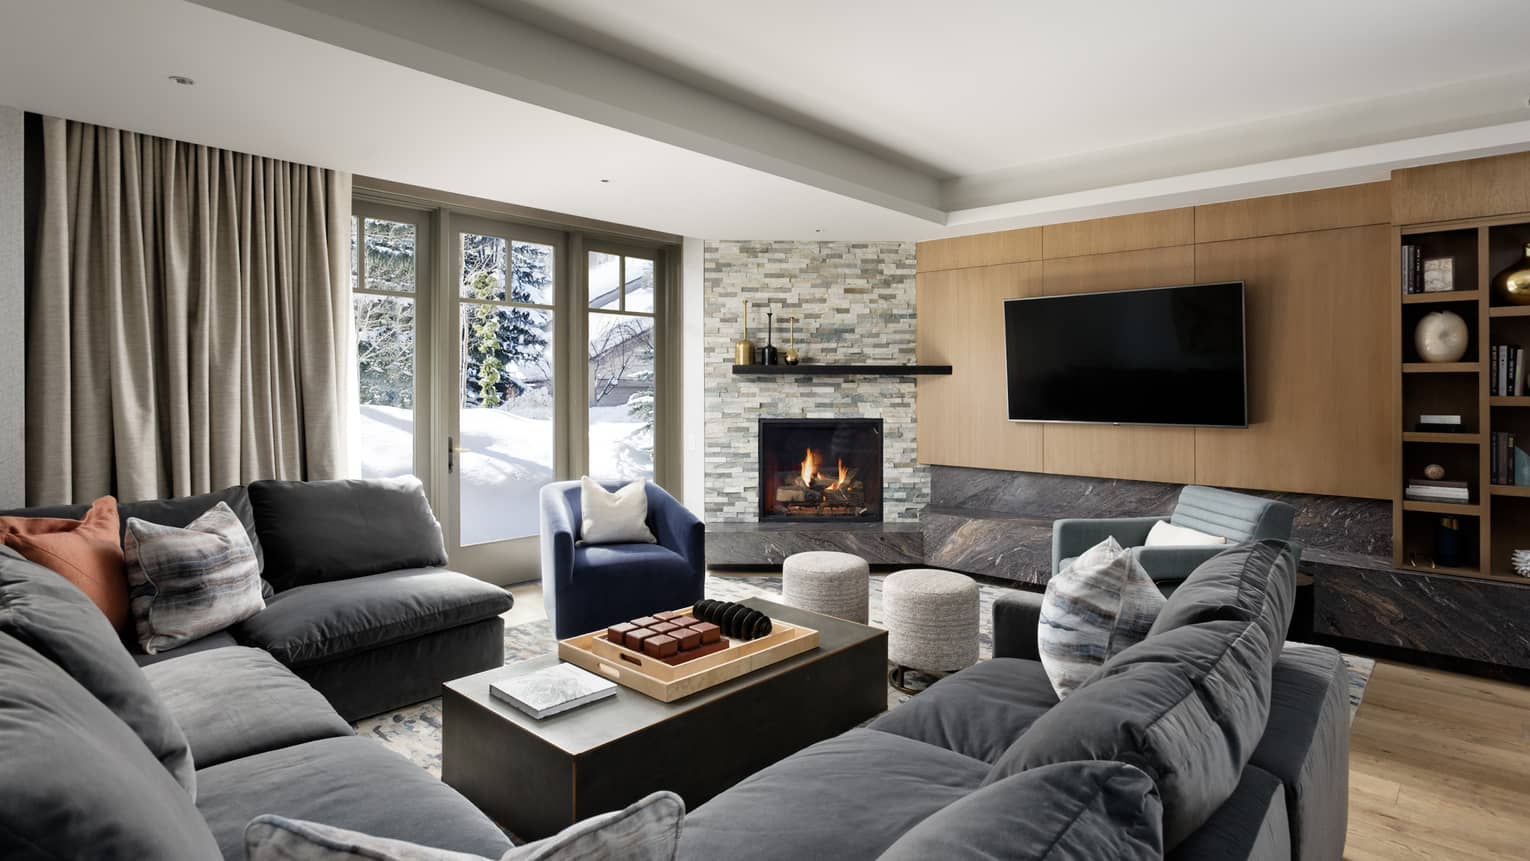 Large grey sectional sofa, wooden floors and walls, TV, fireplace, french doors to outside